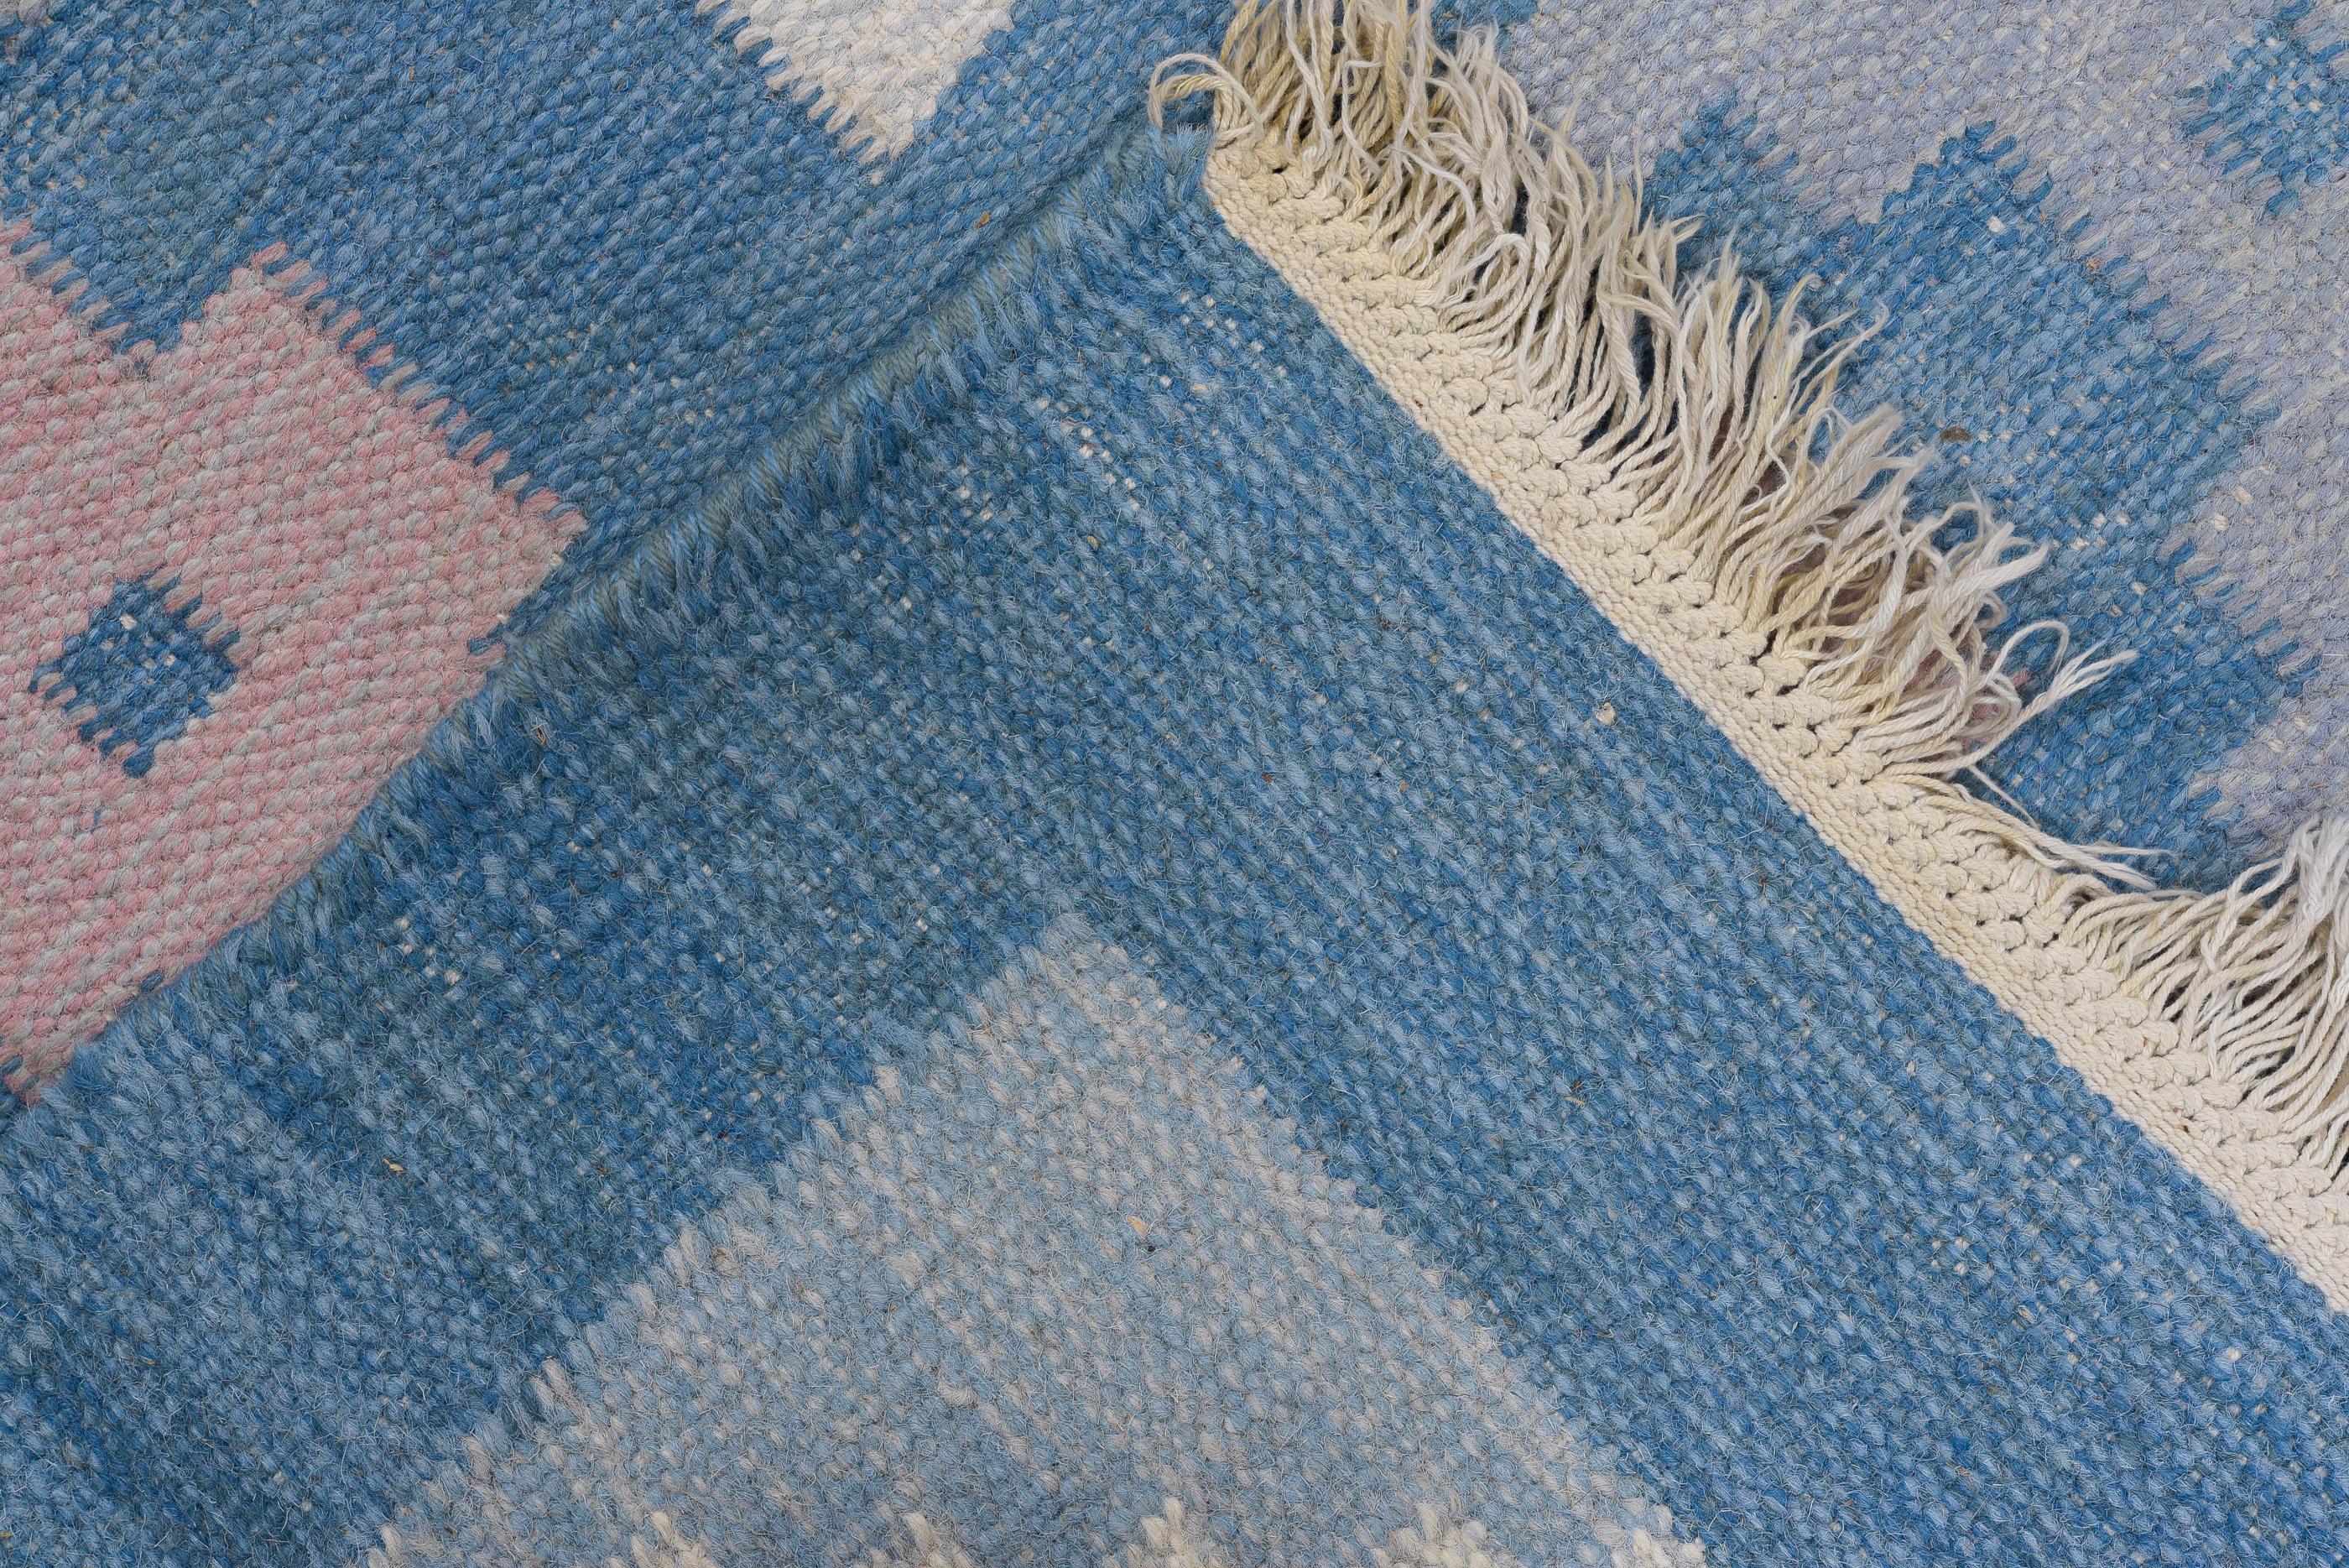 Mid-20th Century Eliko Rugs by David Ariel Vintage Swedish Rollakan Rug, Blue and Pink Tones For Sale